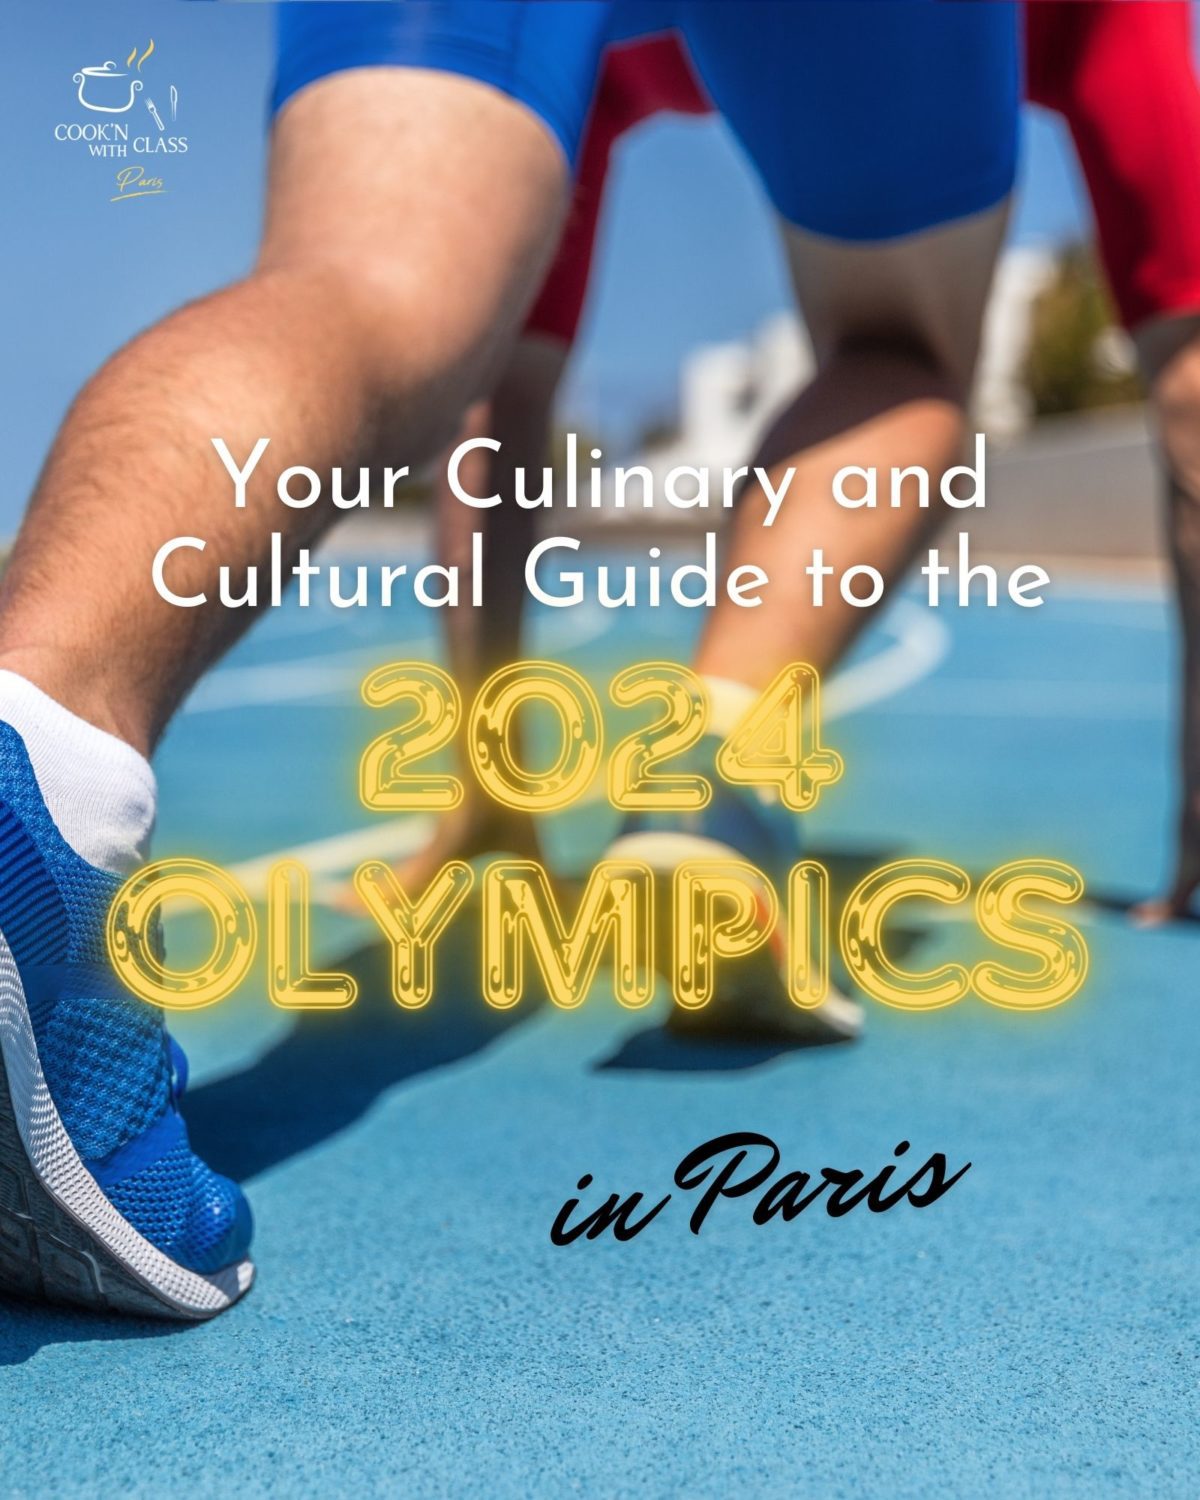 Your Culinary and Cultural Guide to the 2024 Olympics